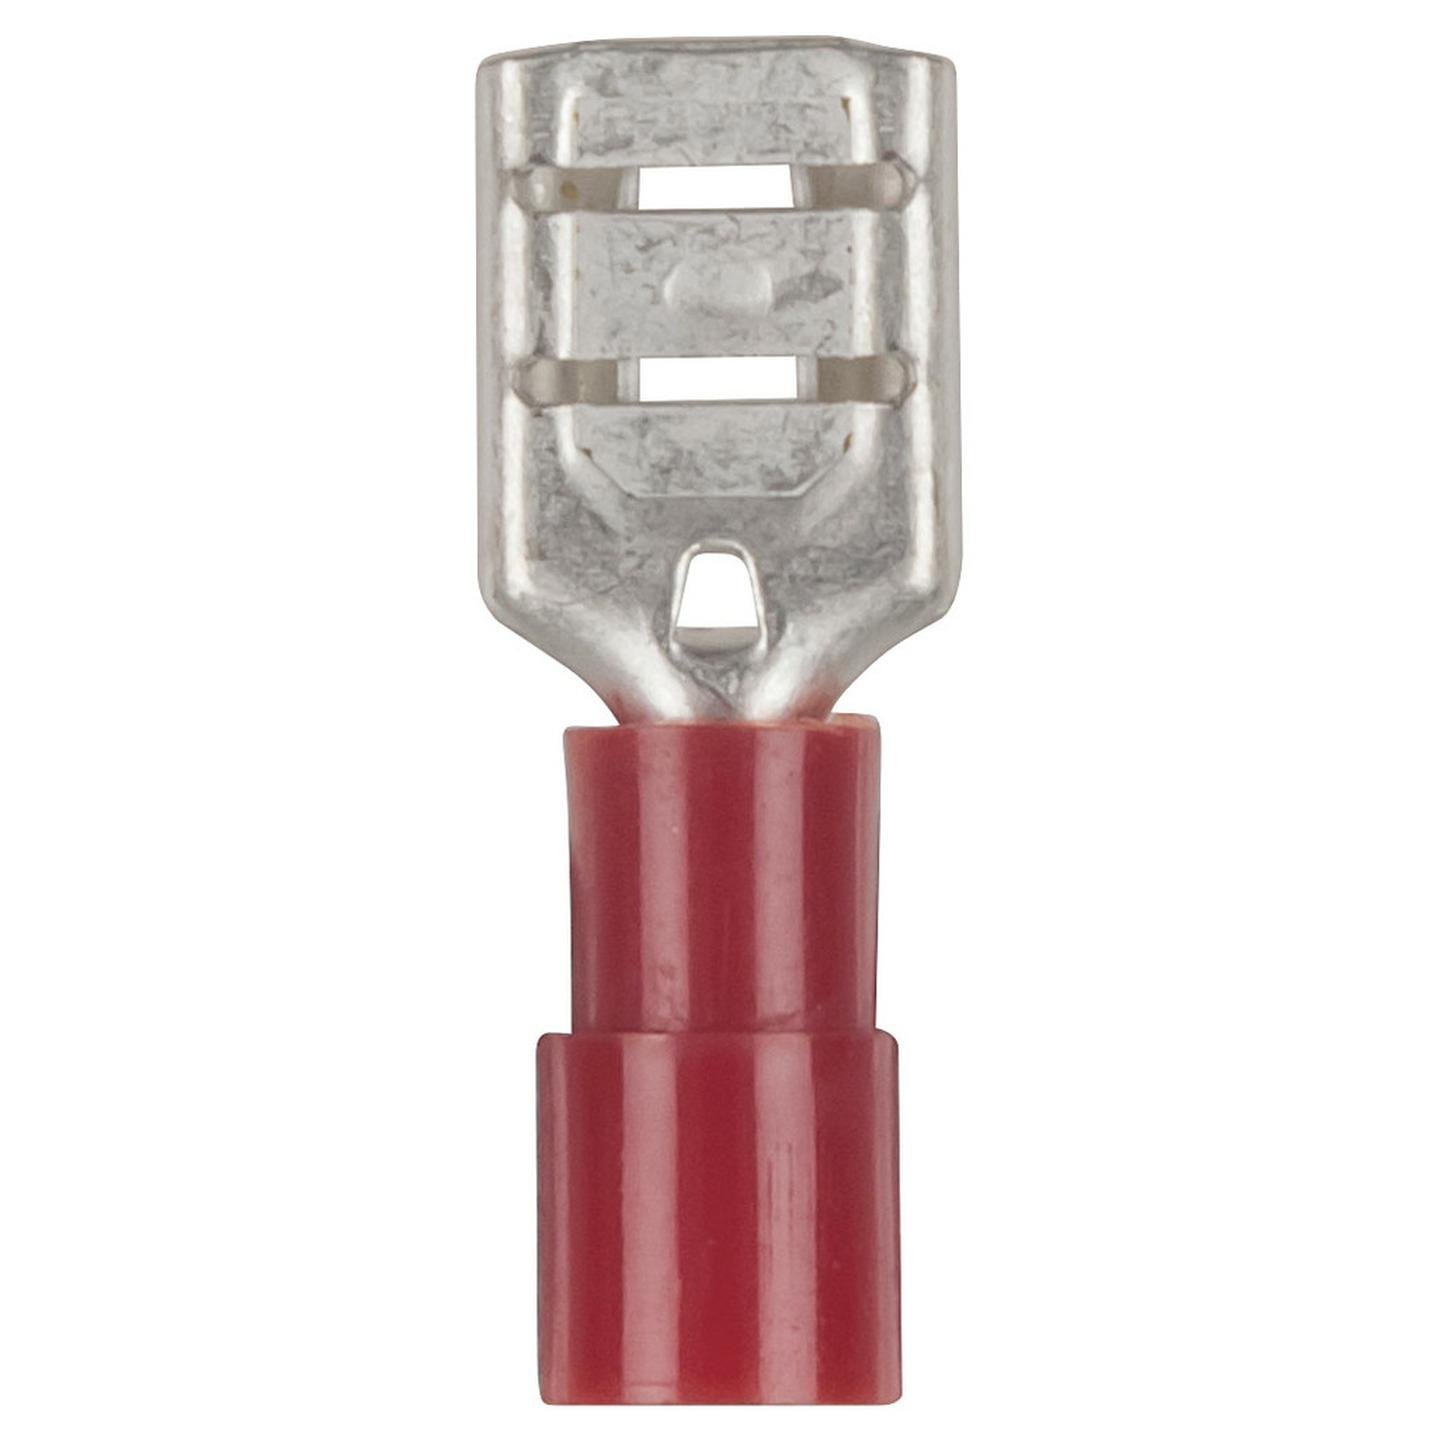 Female Spade - Red - Pack of 8